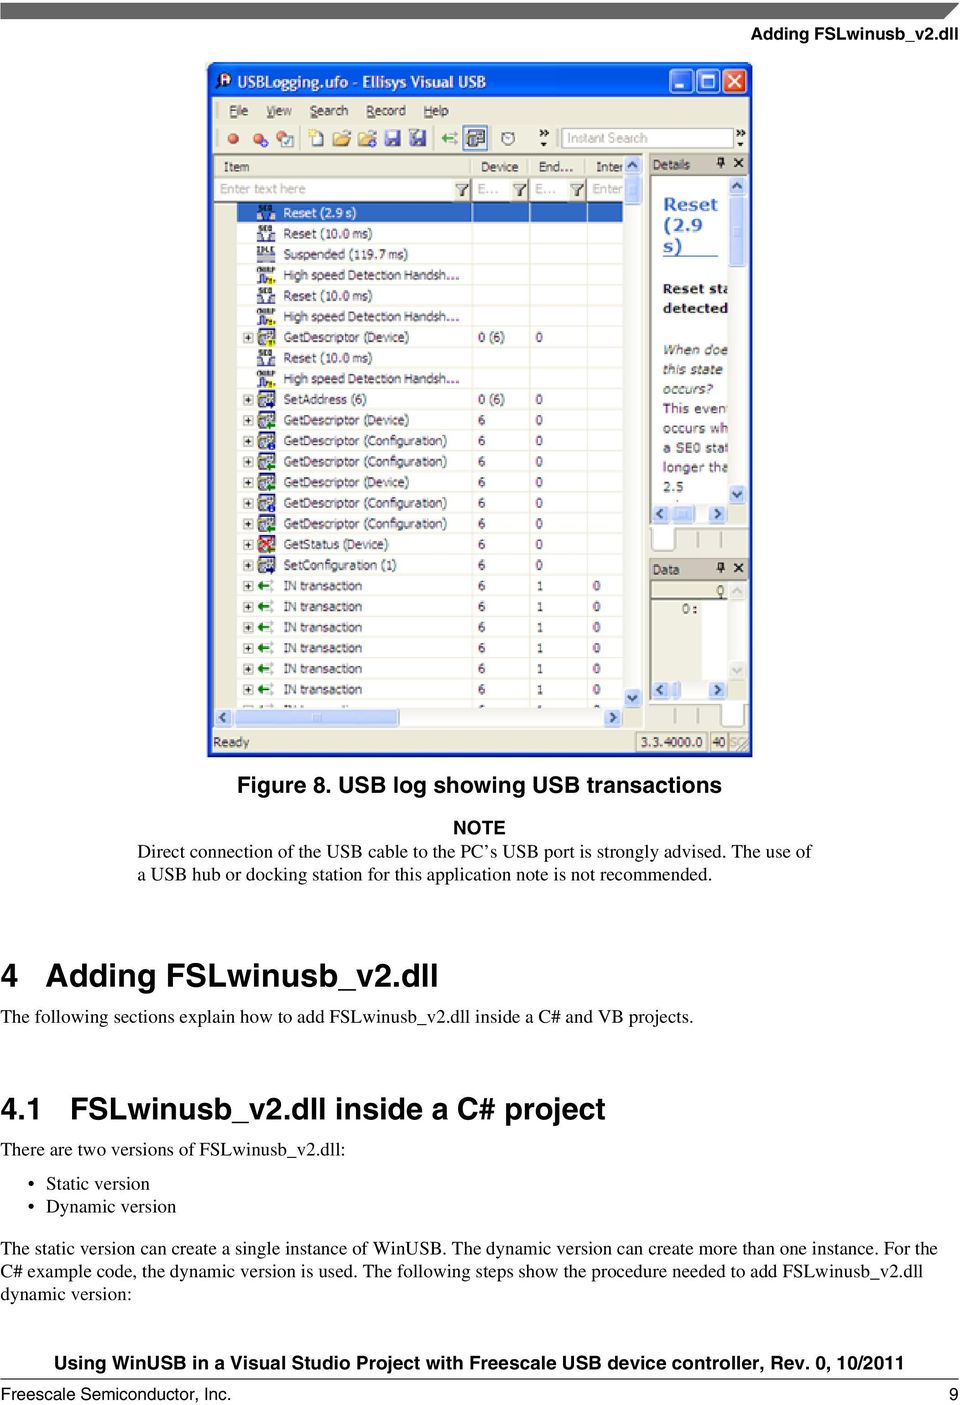 dll inside a C# and VB projects. 4.1 FSLwinusb_v2.dll inside a C# project There are two versions of FSLwinusb_v2.